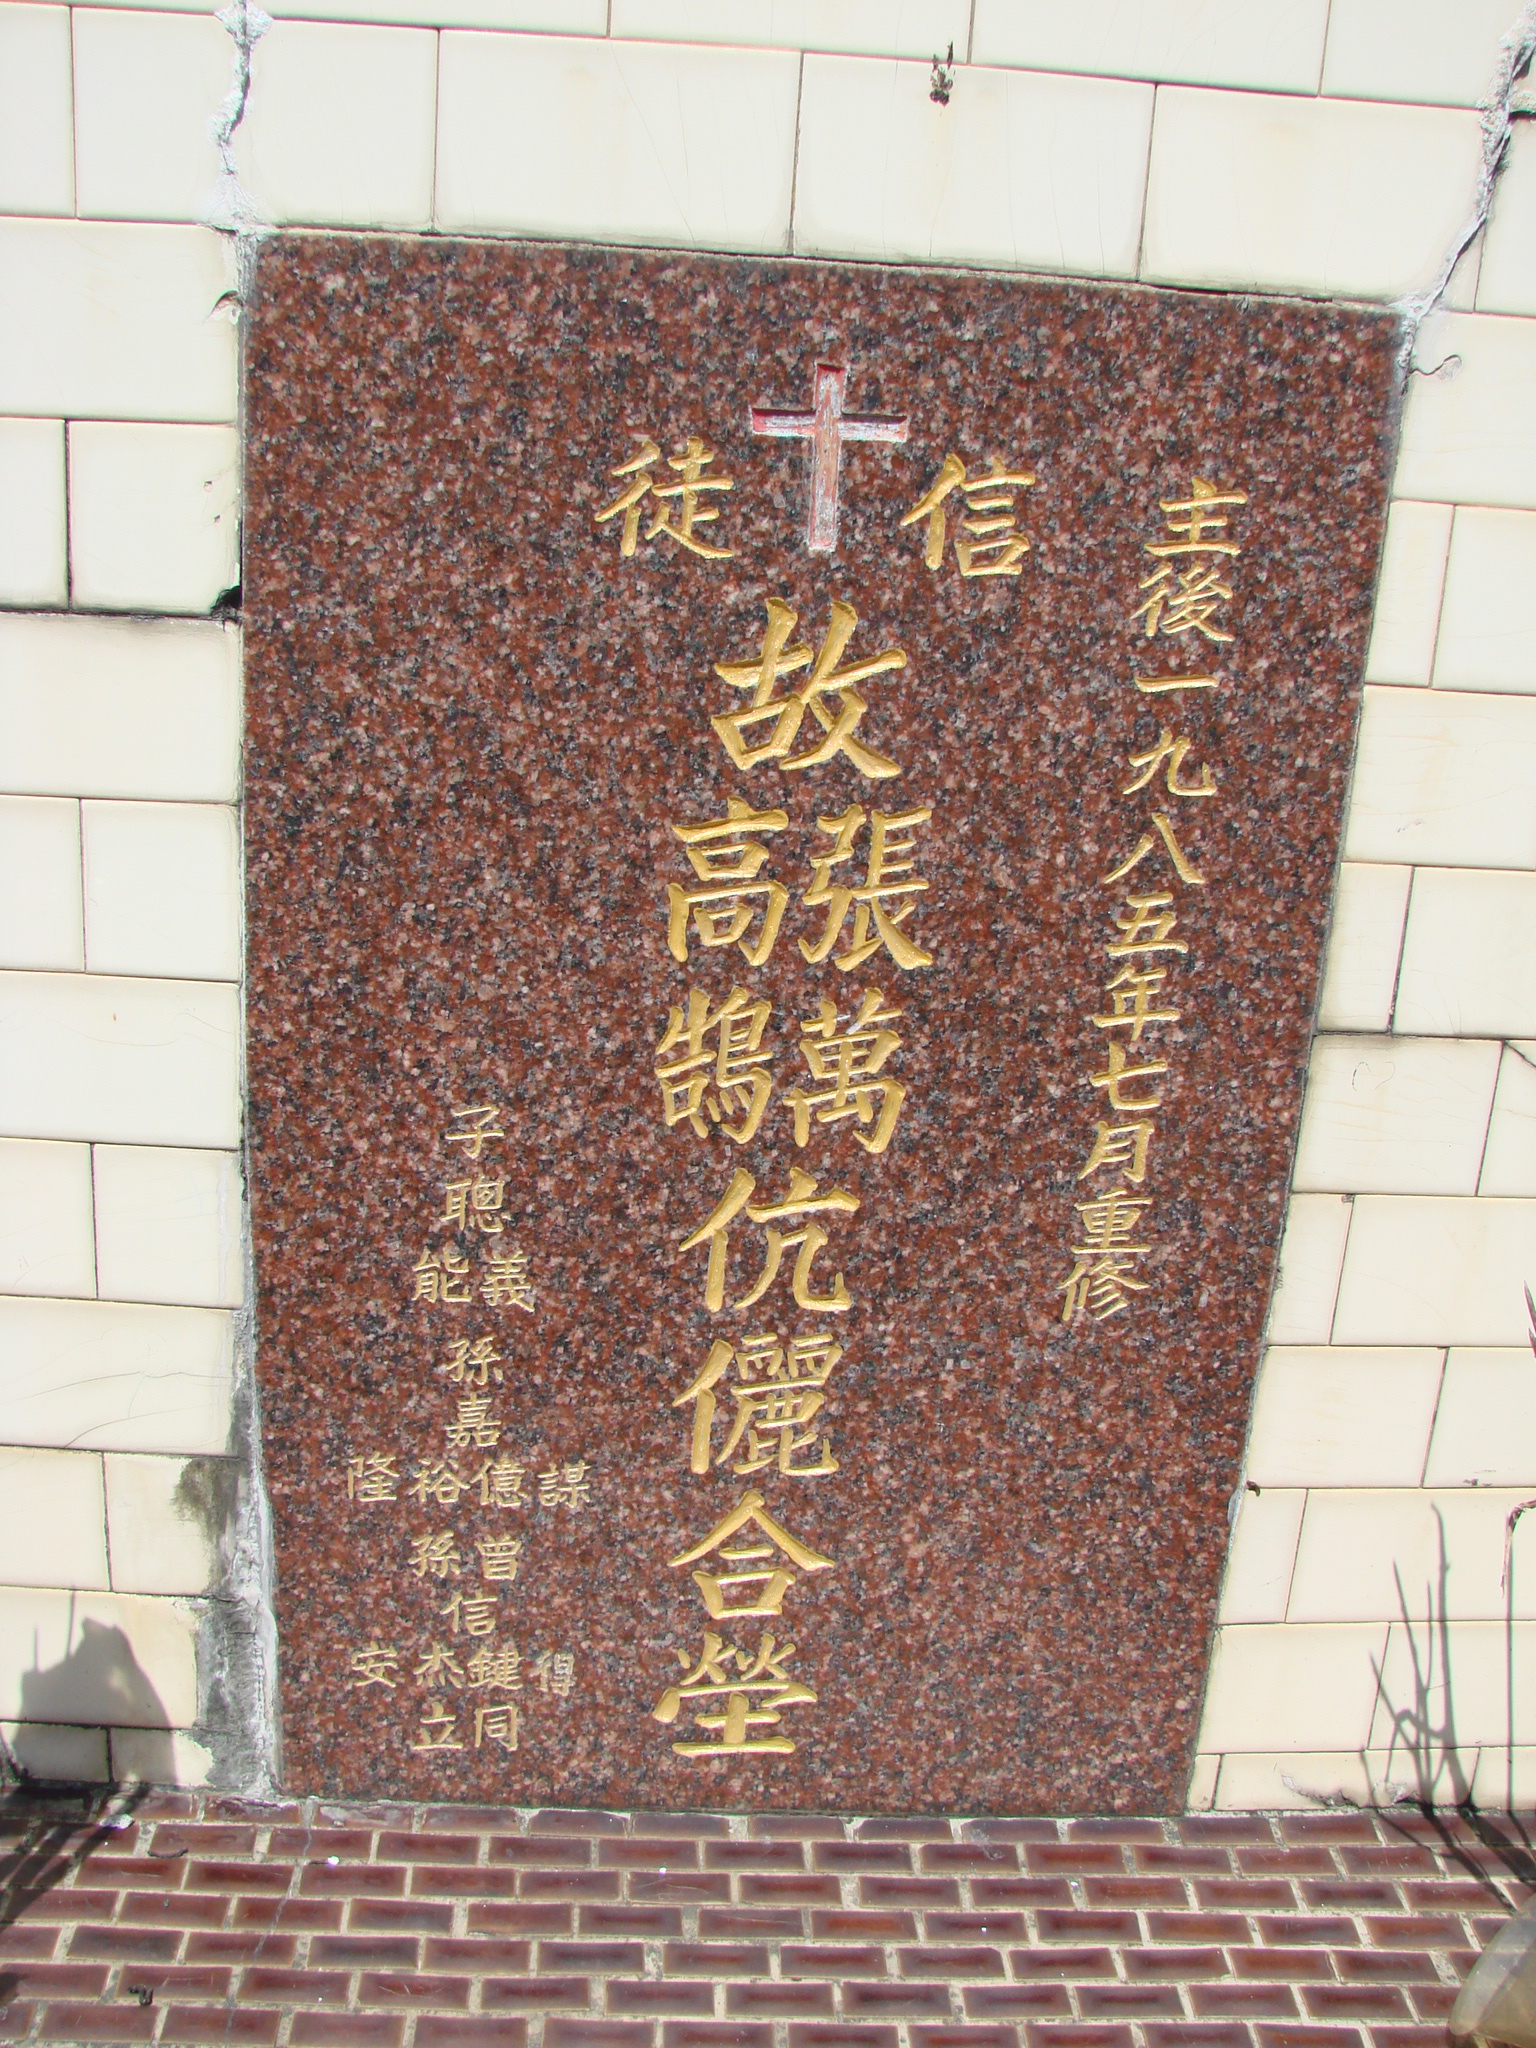 Tombstone of 張 (ZHANG1) family at Taiwan, Pingdongxian, Ligangxiang, northwest of Pin 12. The tombstone-ID is 2343; 台灣，屏東縣，里港鄉，屏12號西北，張姓之墓碑。